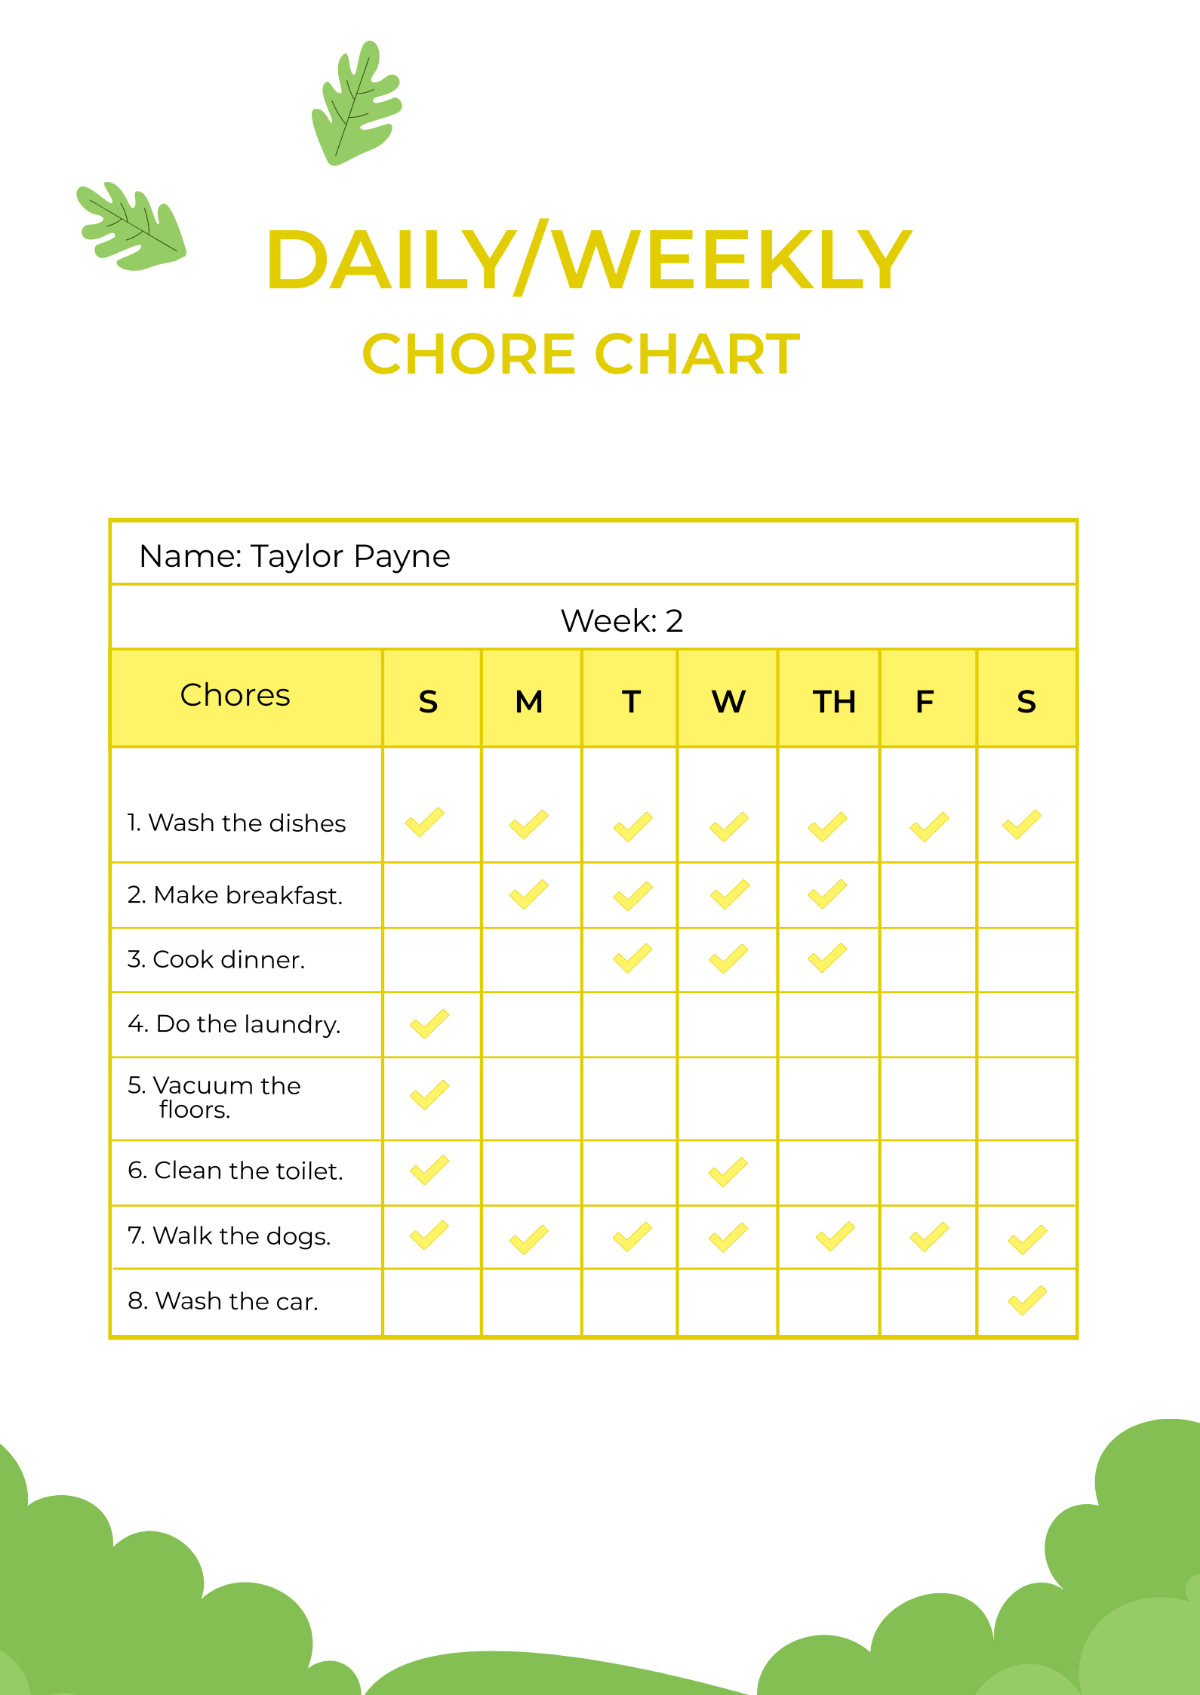 Daily/Weekly Chore Chart Template